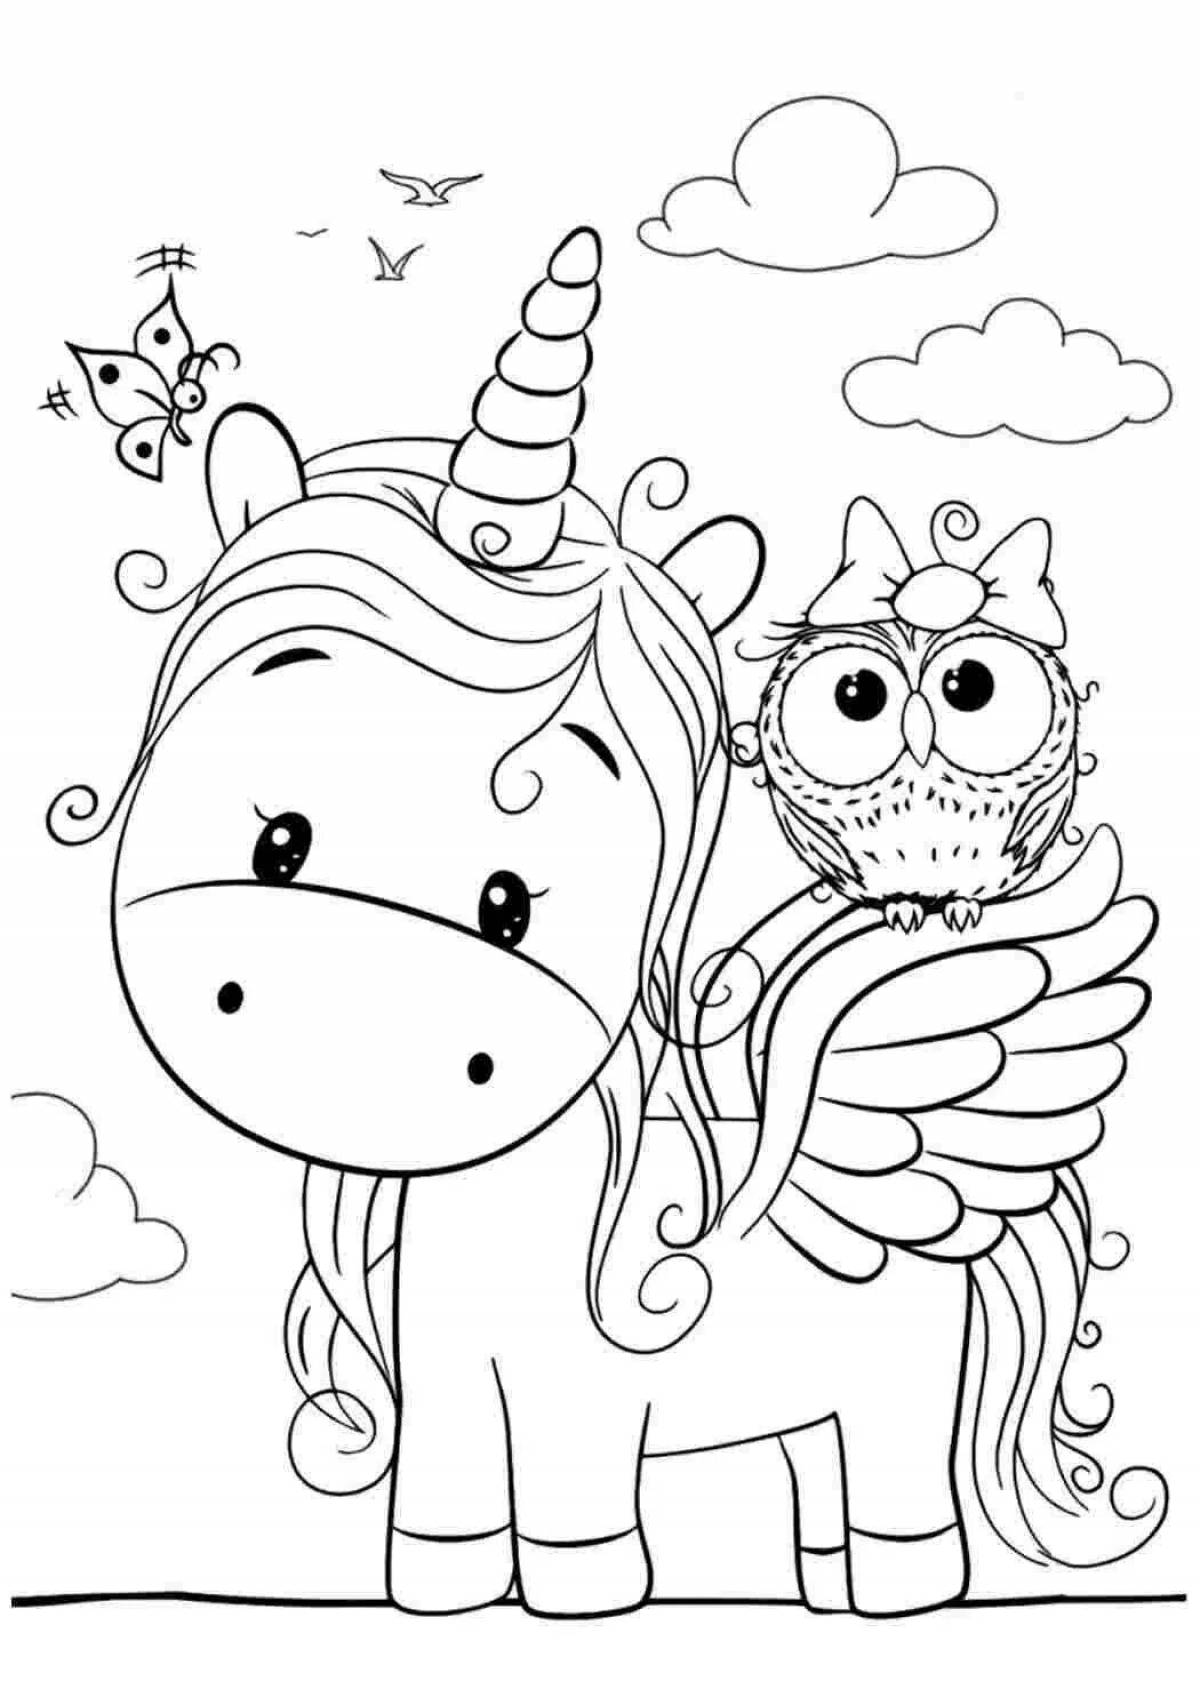 Sparkling coloring pages for girls cute unicorns